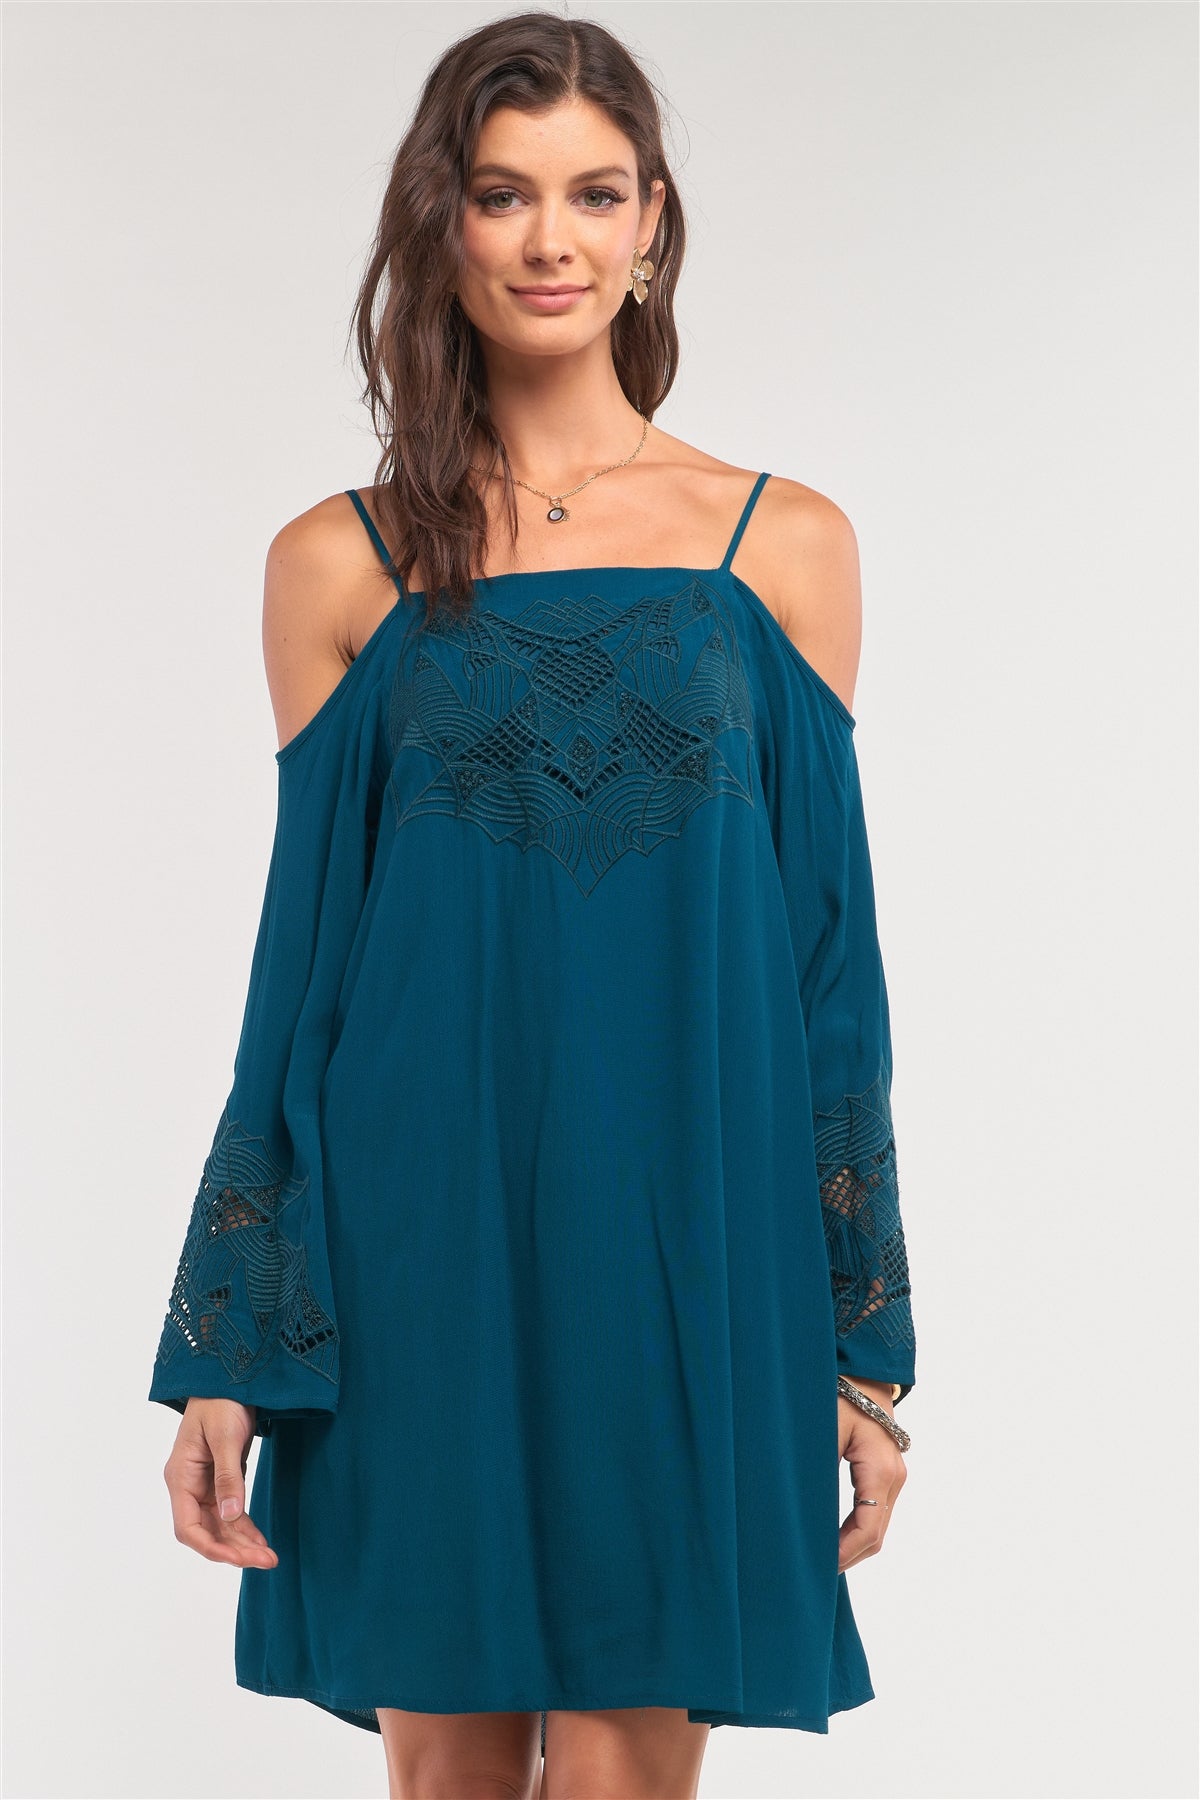 Our Best 100% Rayon Off-The-Shoulder Flare Long Sleeve Square Neck Crochet Embroidery Mini Dress (Teal Green)